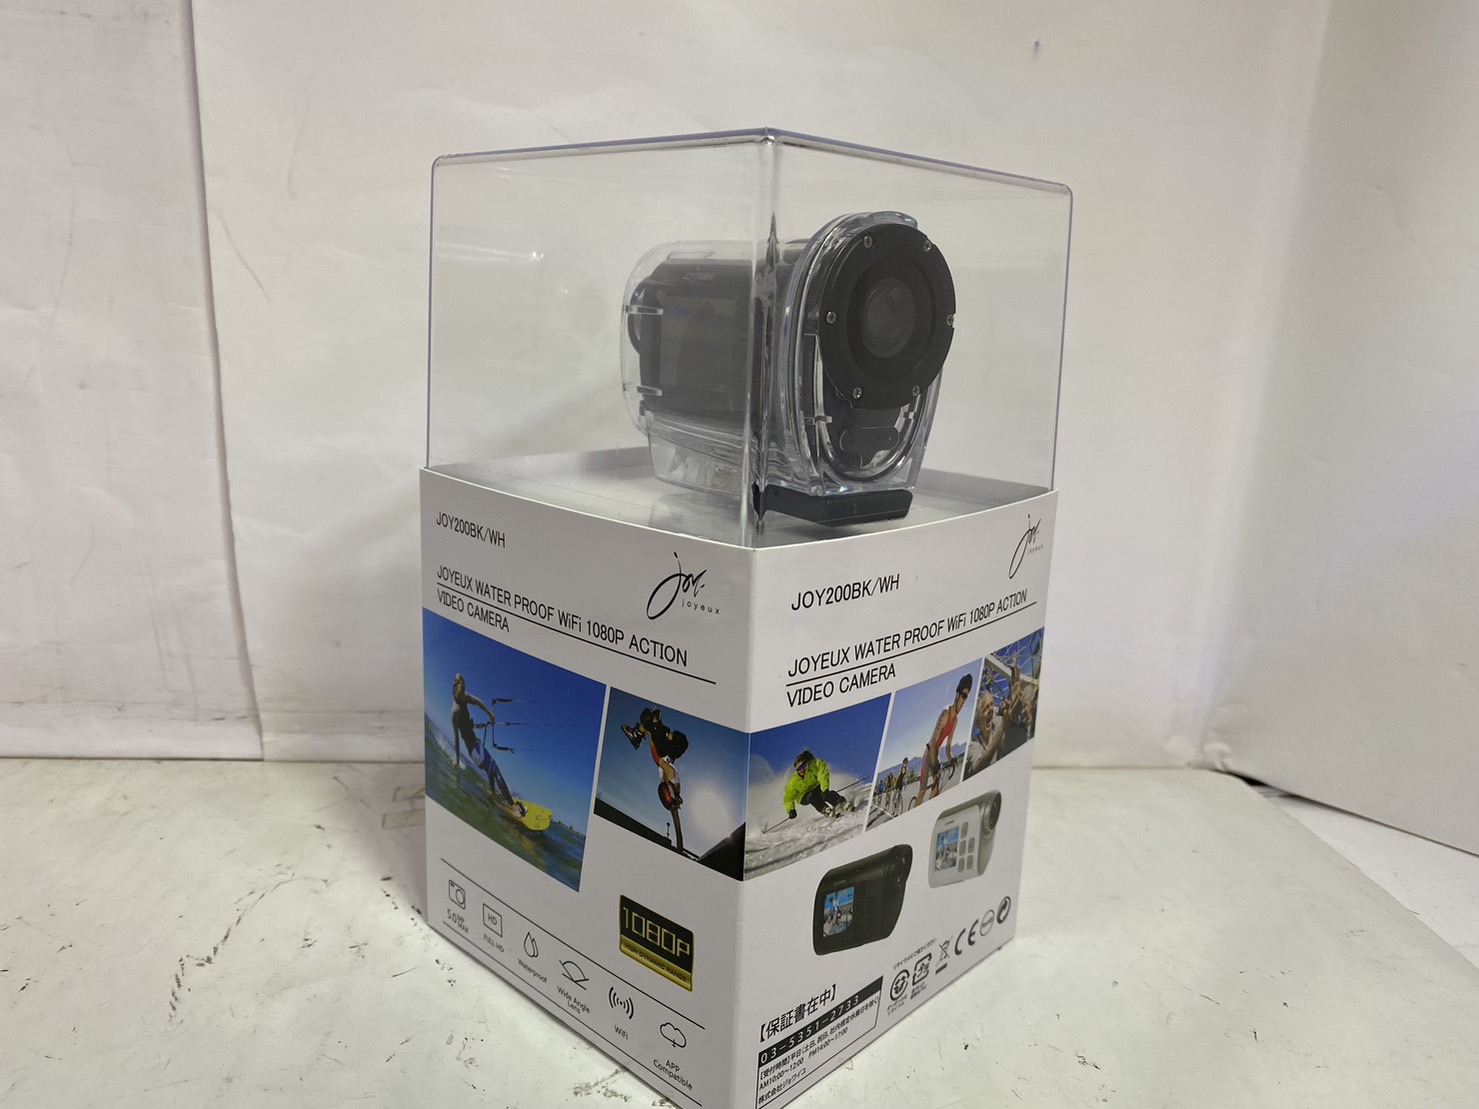 WATER PROOF WiFi 1080P ACTION VIDEO CAMERA  JOY200